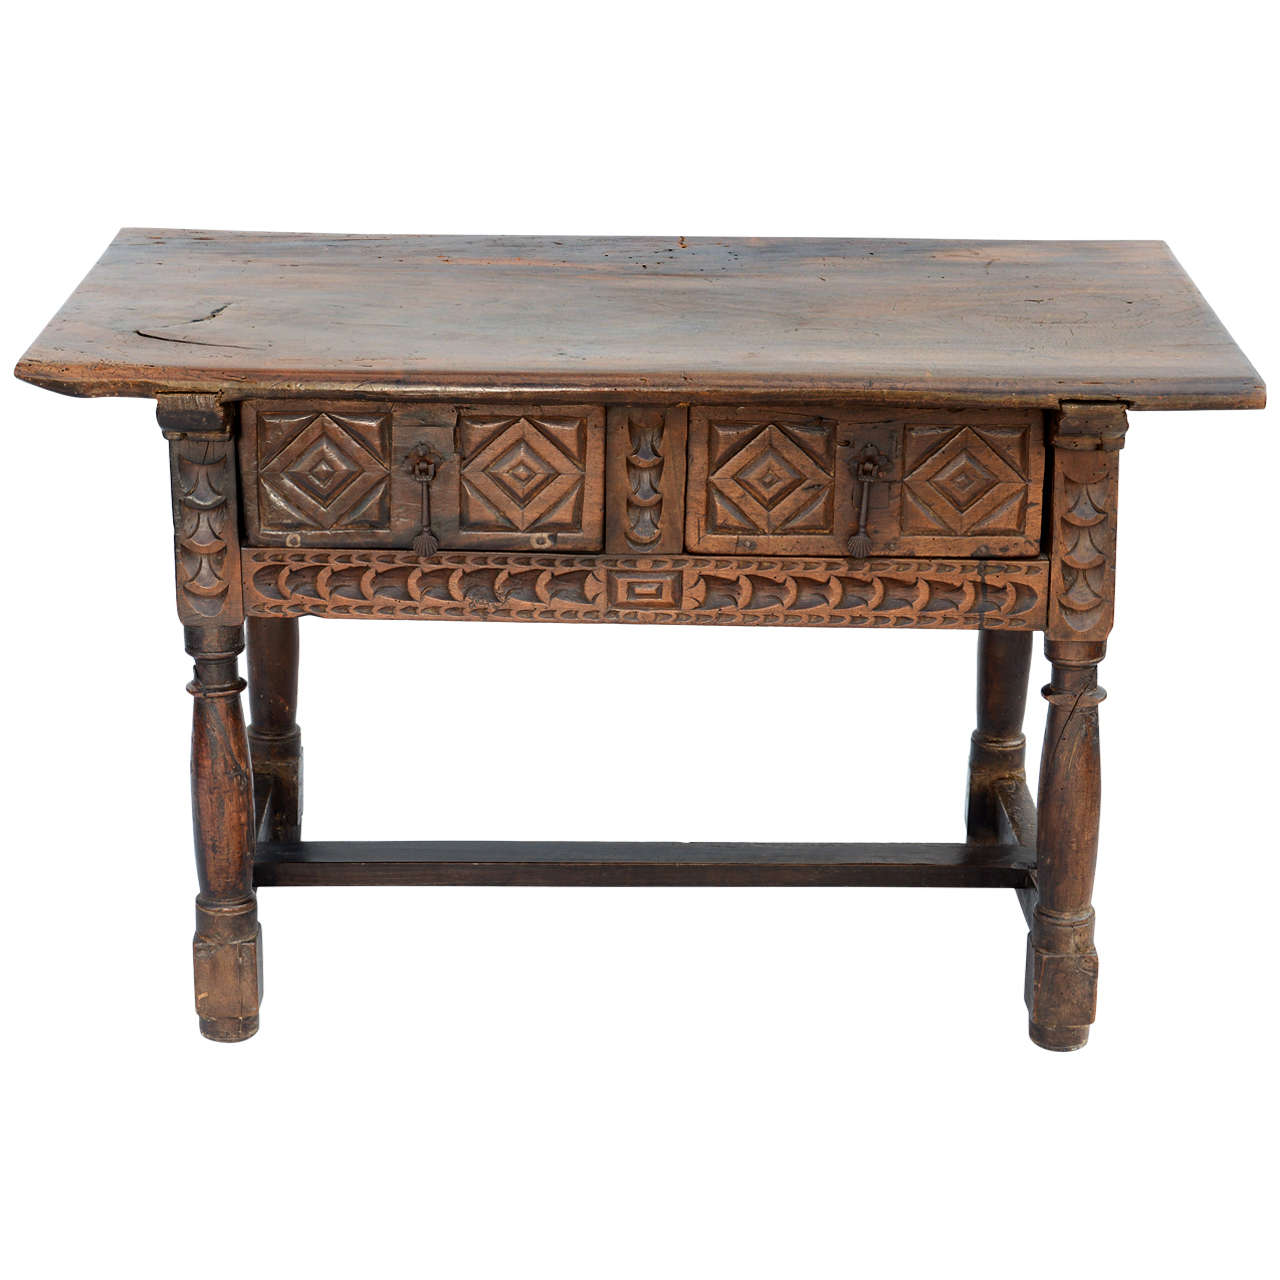 17th to 18th Century Spanish Walnut Refectory Table